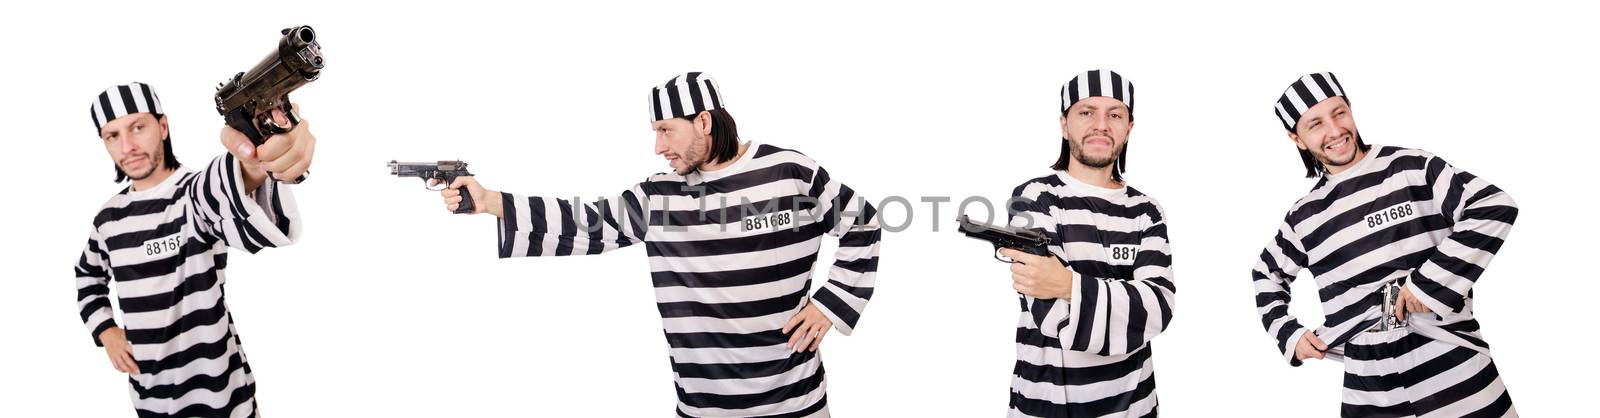 Prison inmate with gun isolated on white